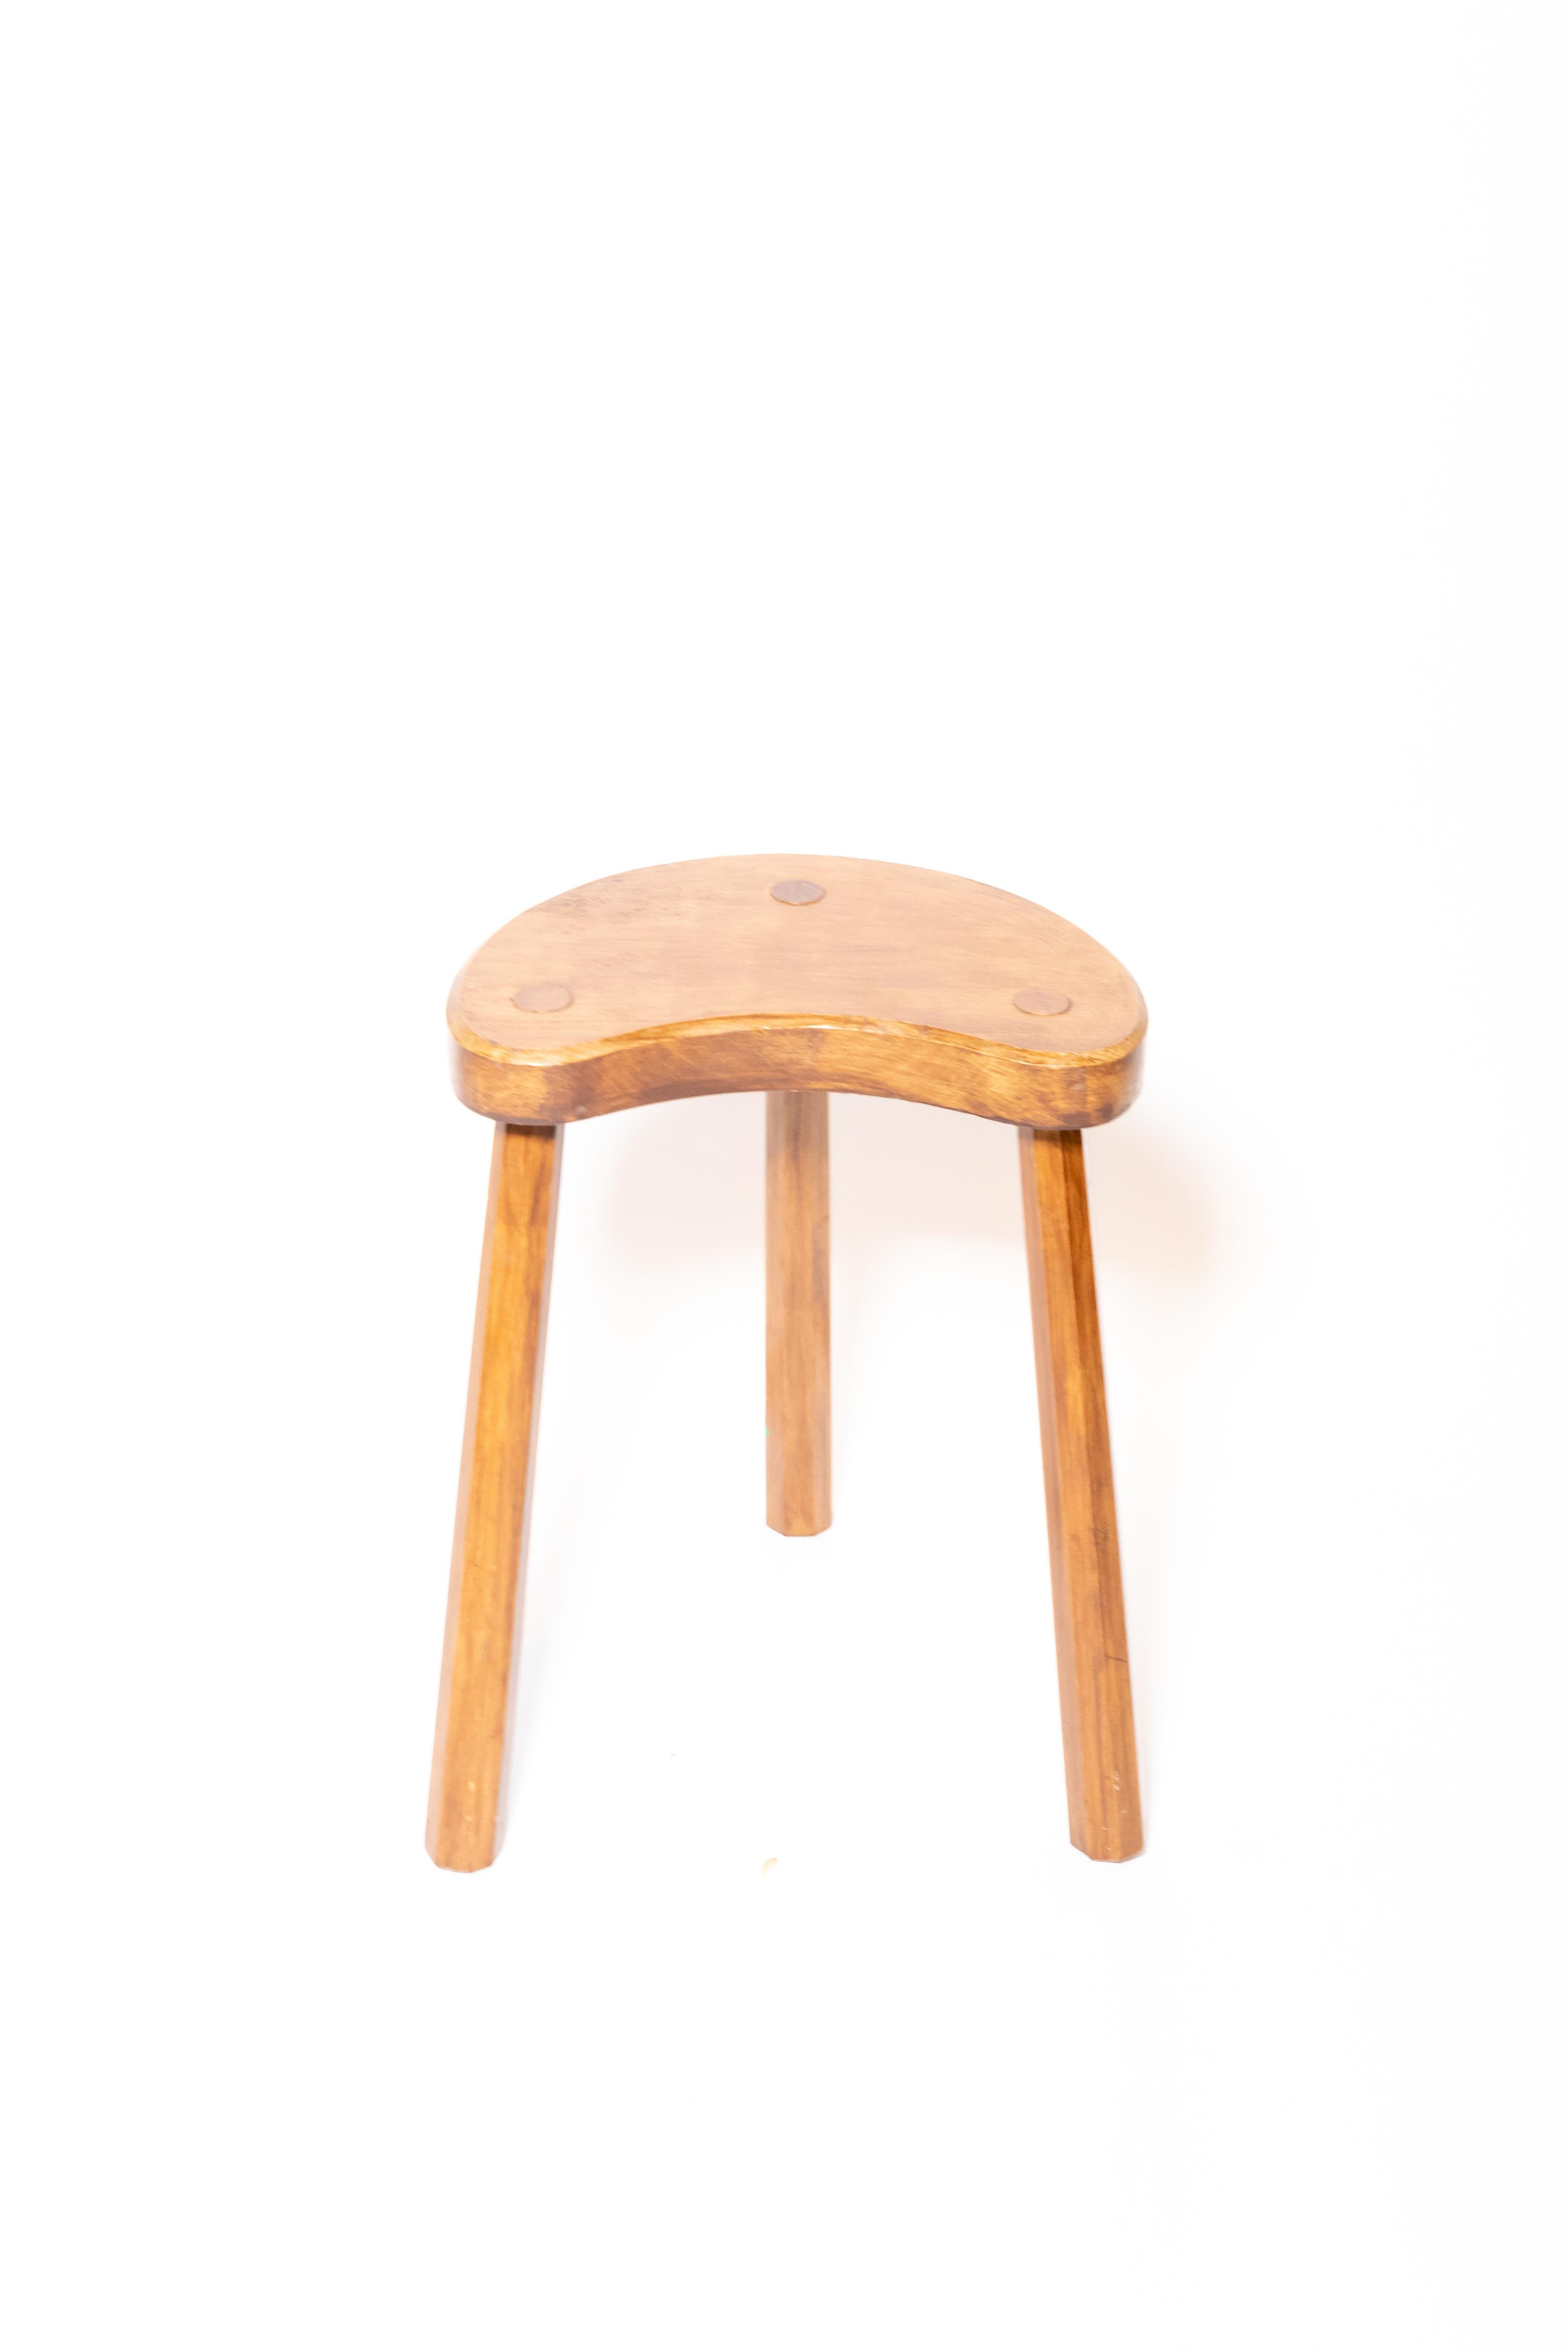 Wooden tabouret with three legs, France, 1950s
Four available.